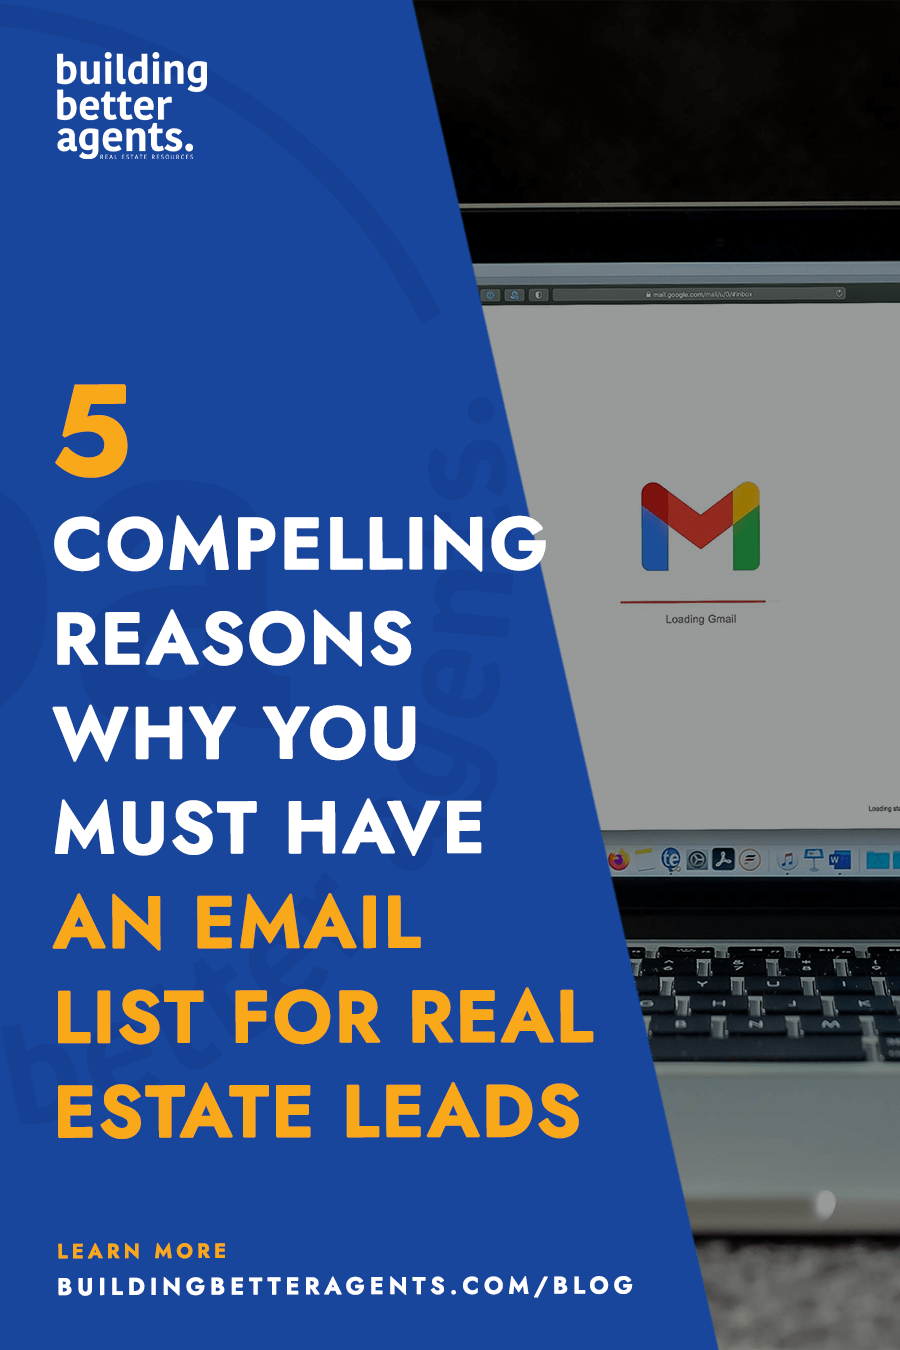 5 Compelling Reasons Why You Must Have An Email List for Real Estate Leads